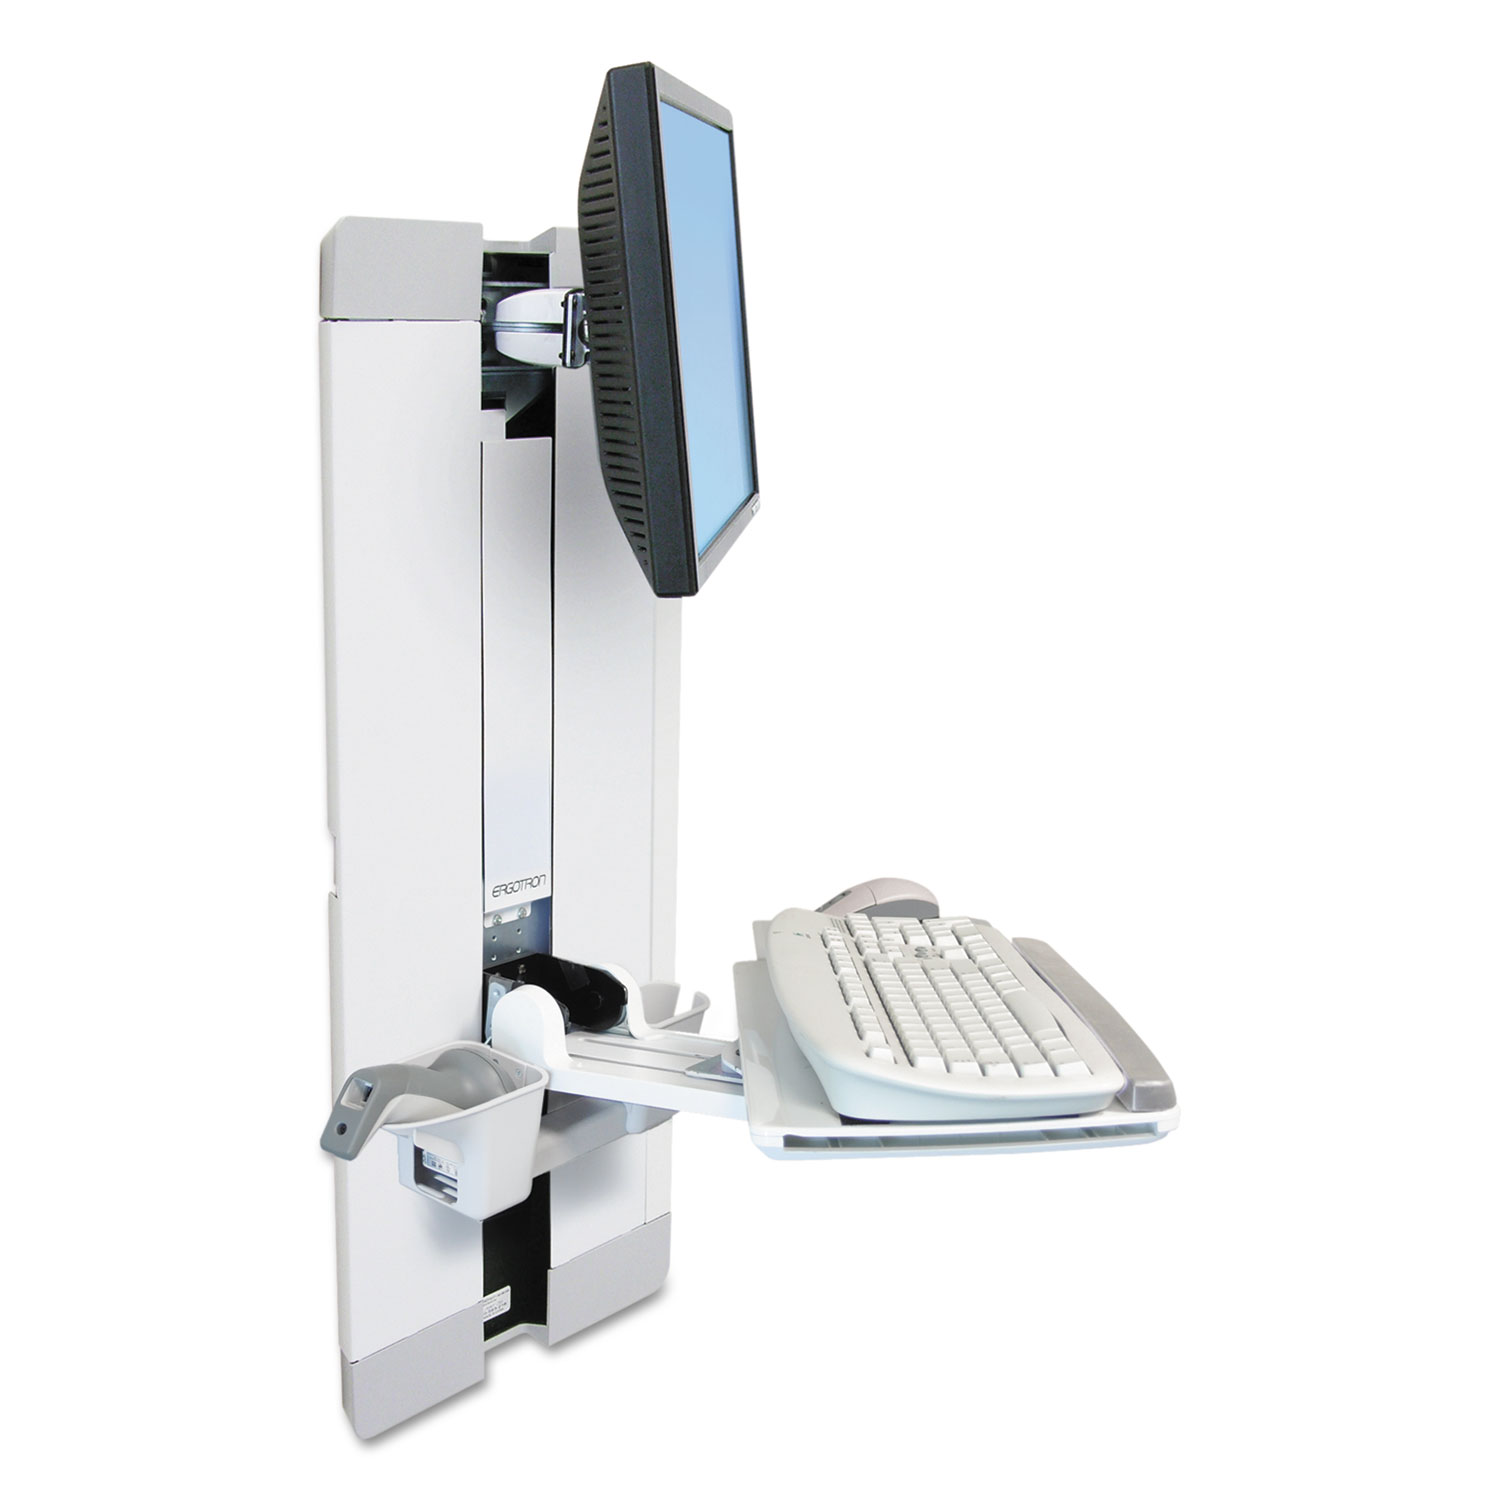  Ergotron 60-609-216 StyleView Vertical Lift For Patient Rooms, 18.38w x 18.88d x 30.75h, White (ERG60609216) 